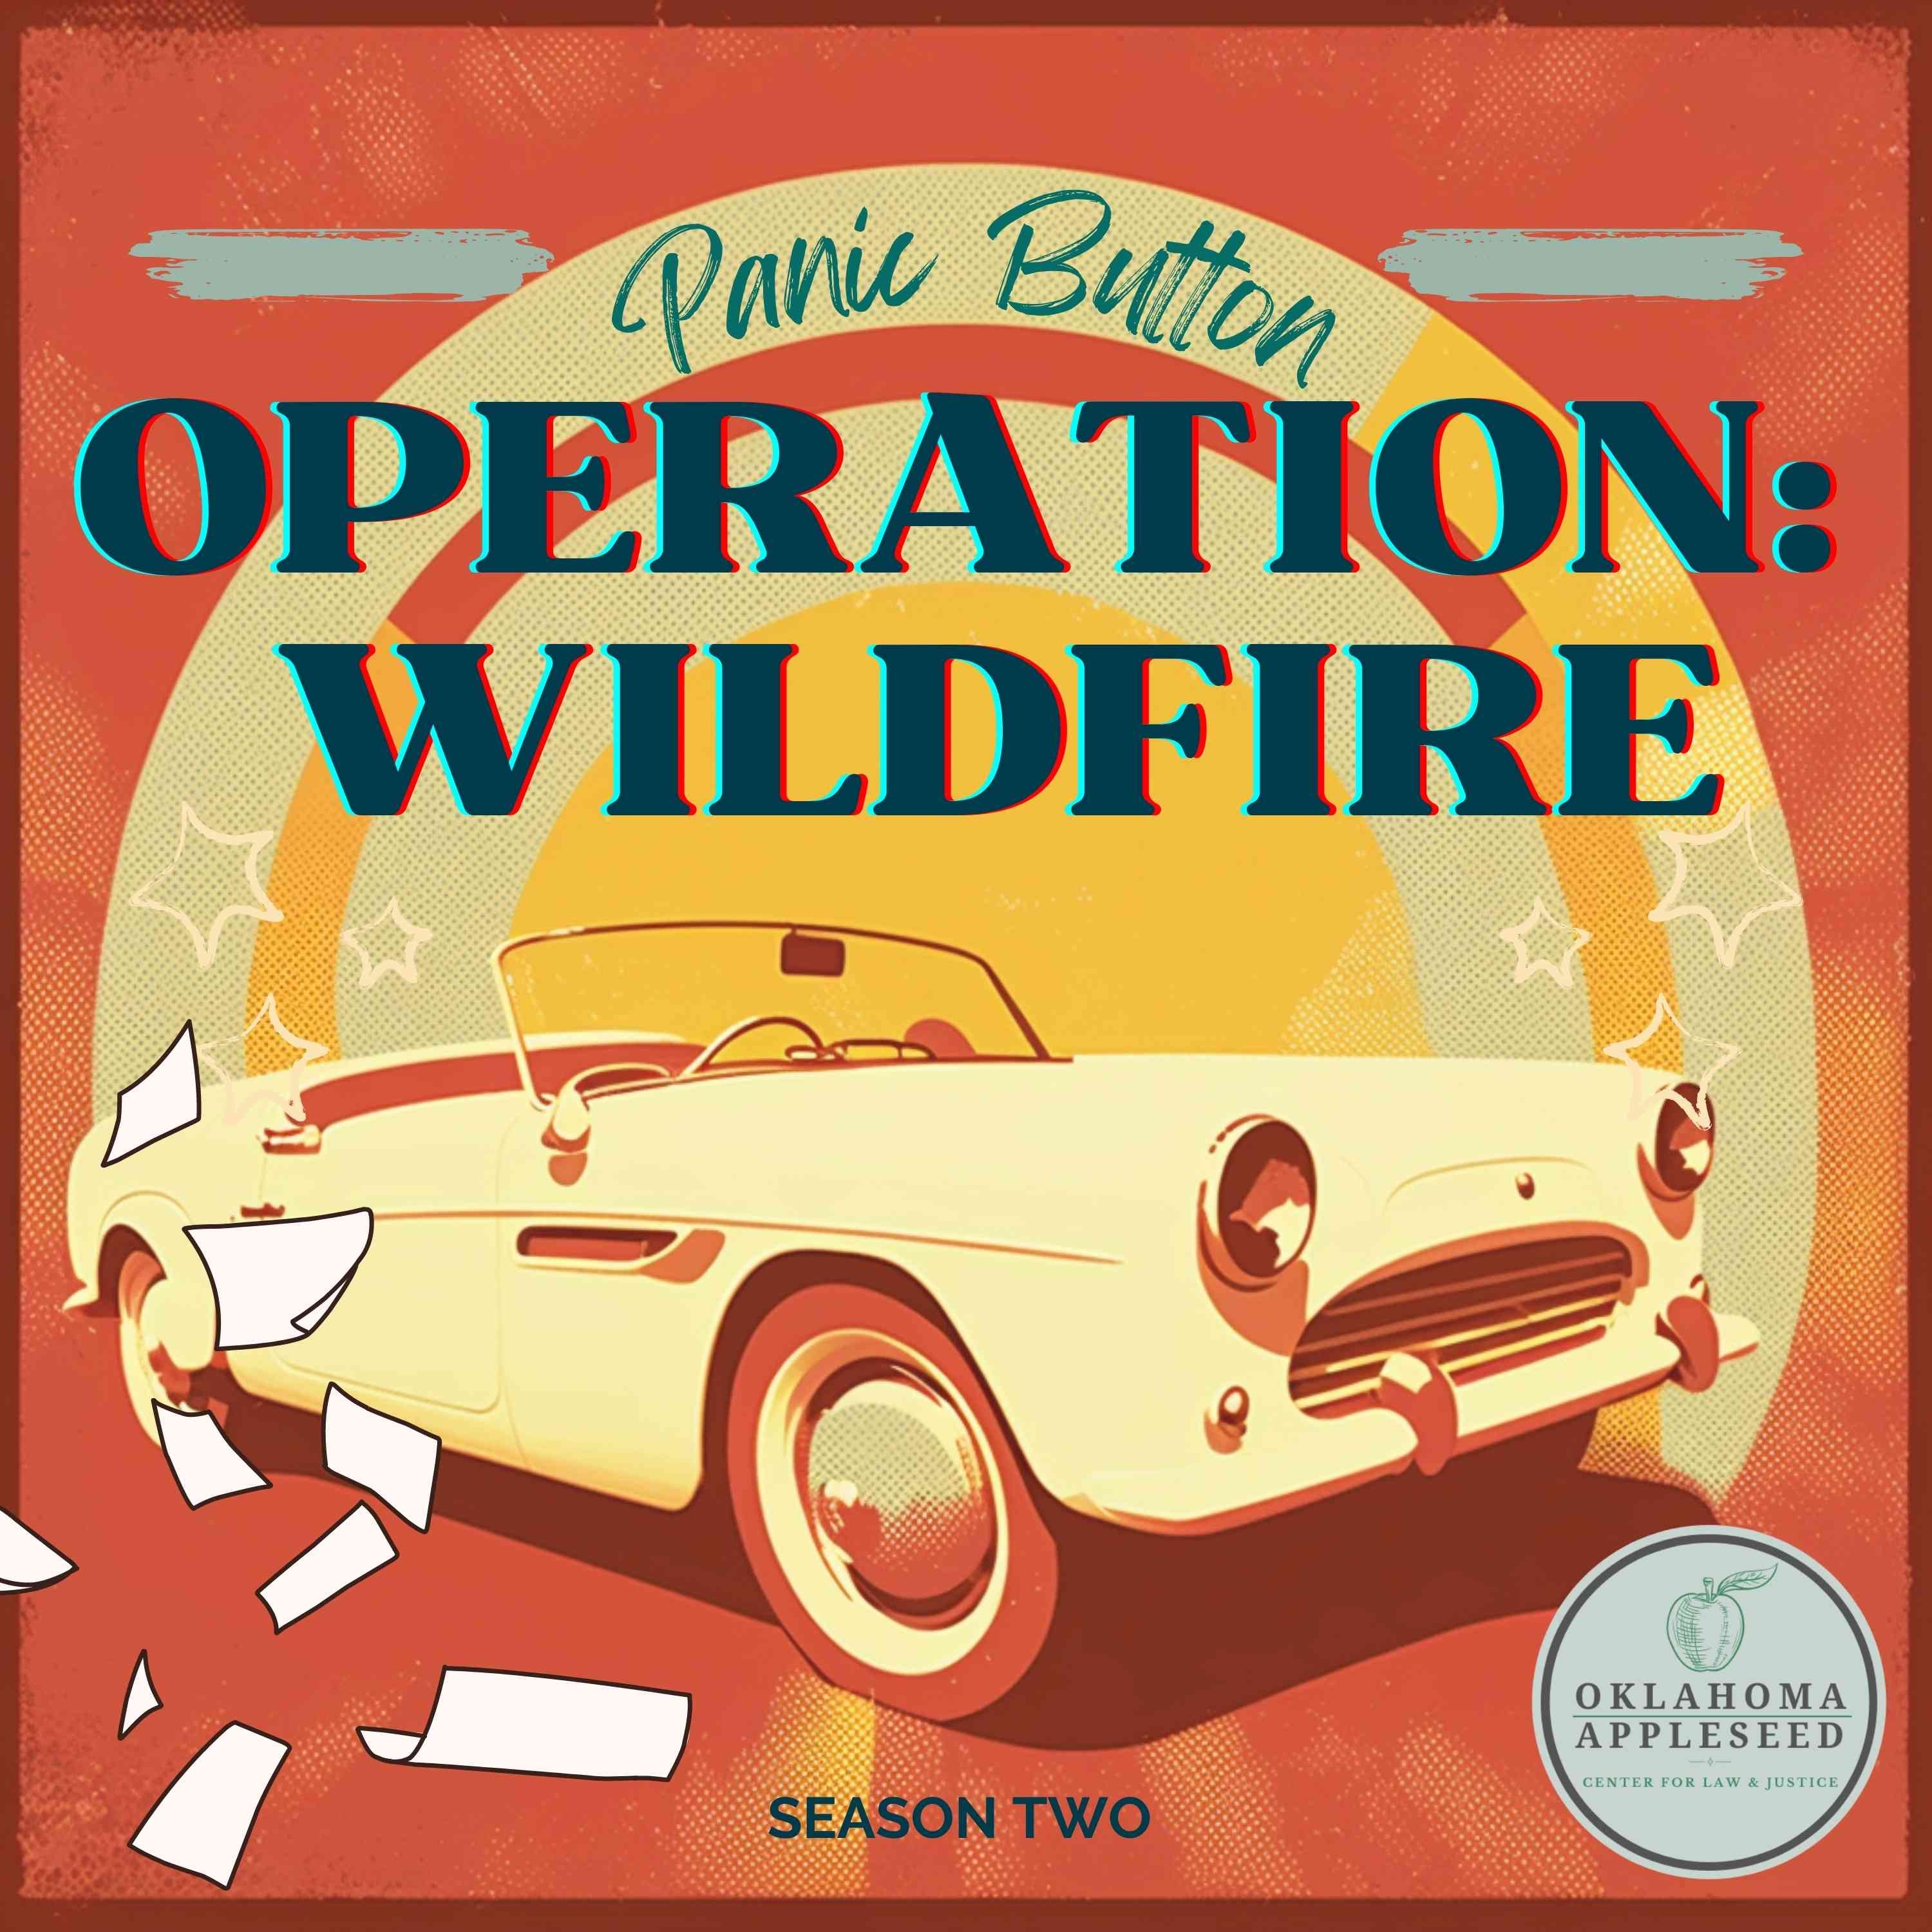 Coming June 27th - Panic Button: Operation Wildfire